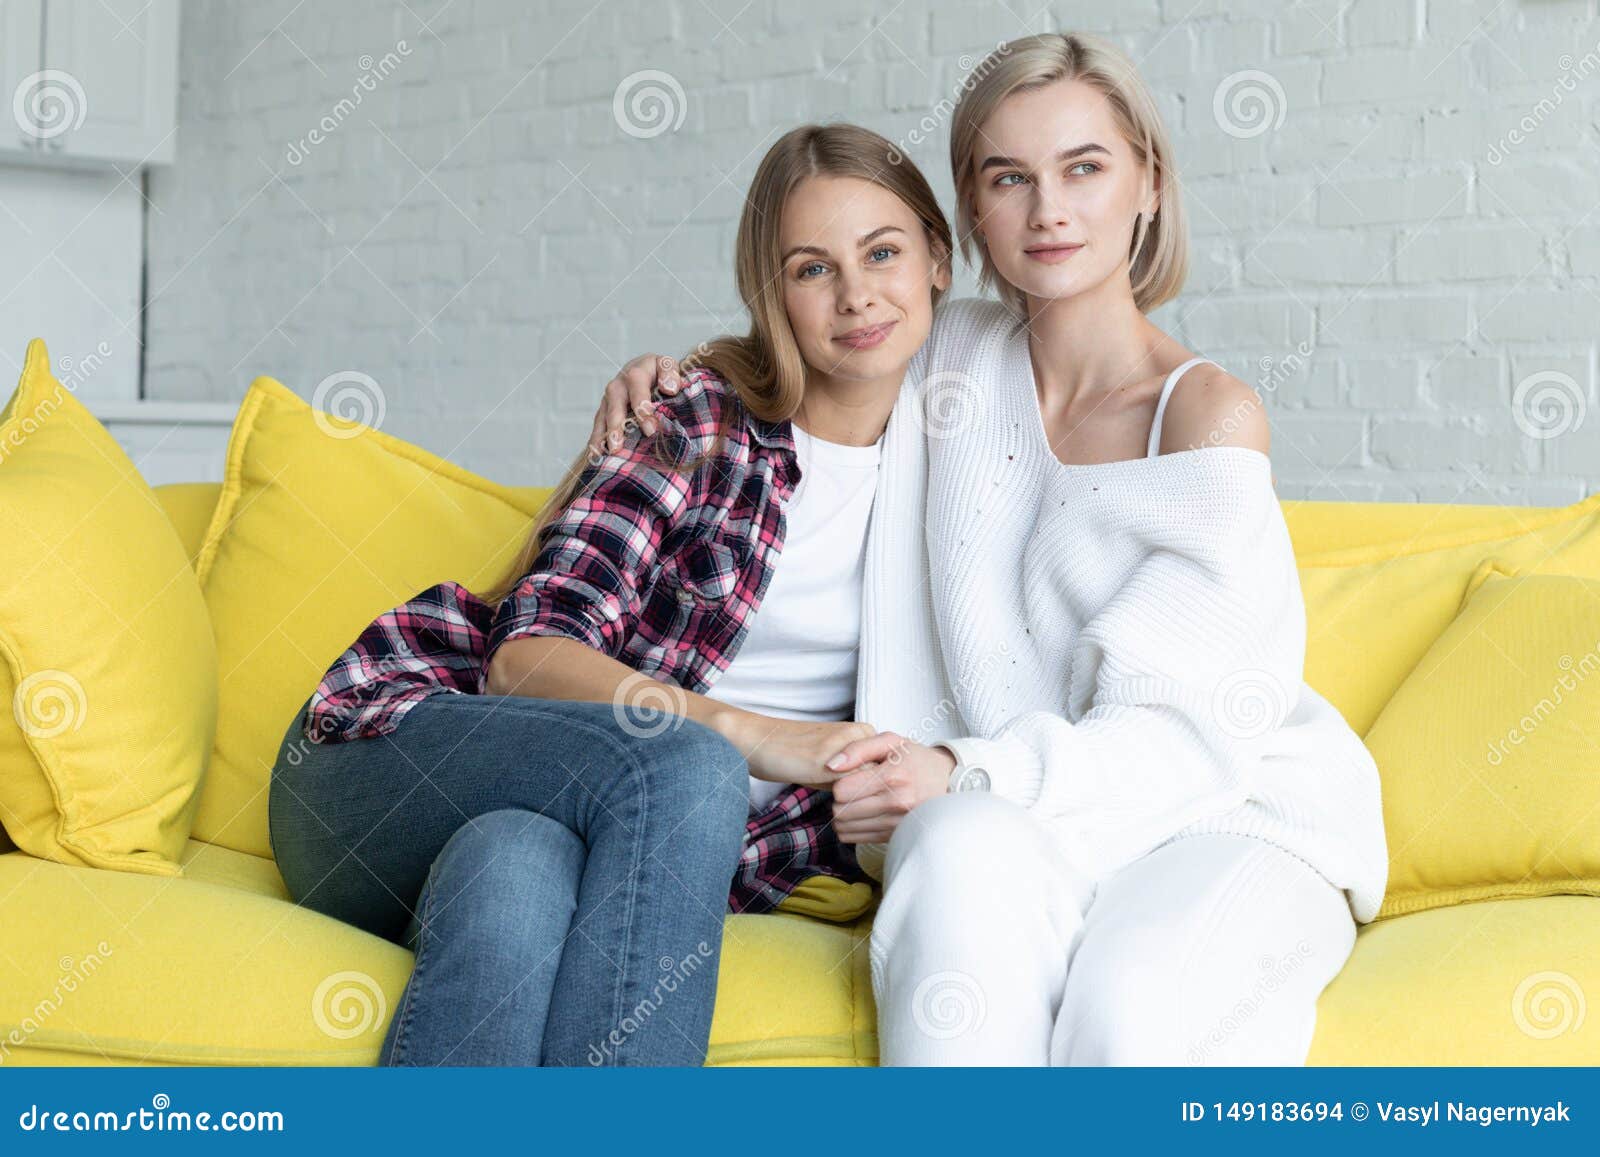 Lesbians on the couch